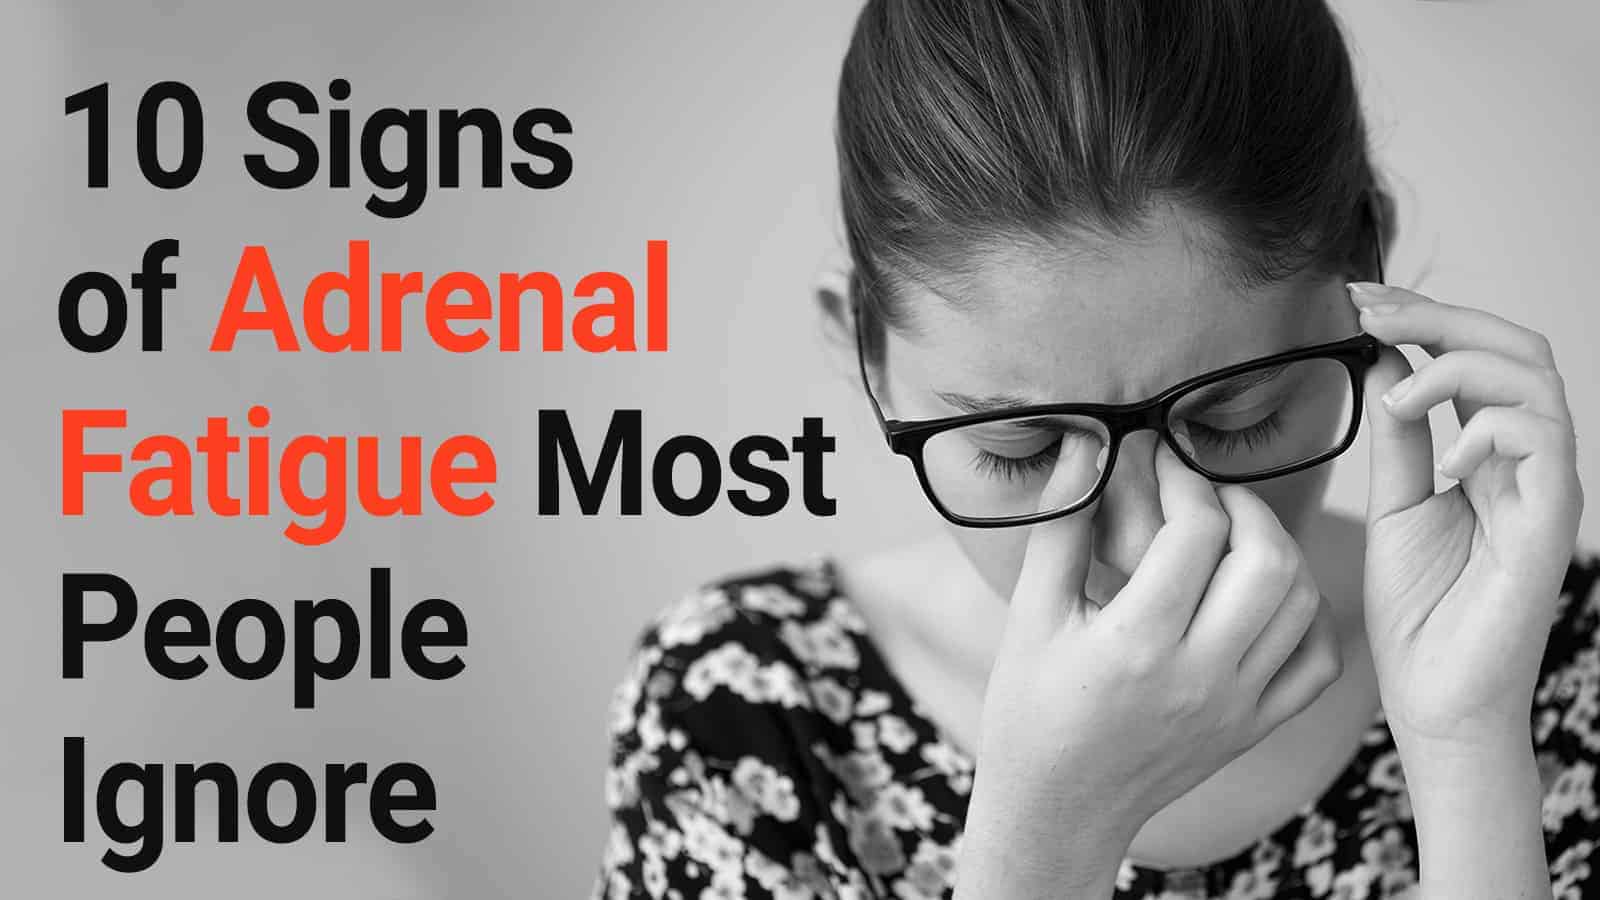 10 Signs of Adrenal Fatigue Most People Ignore